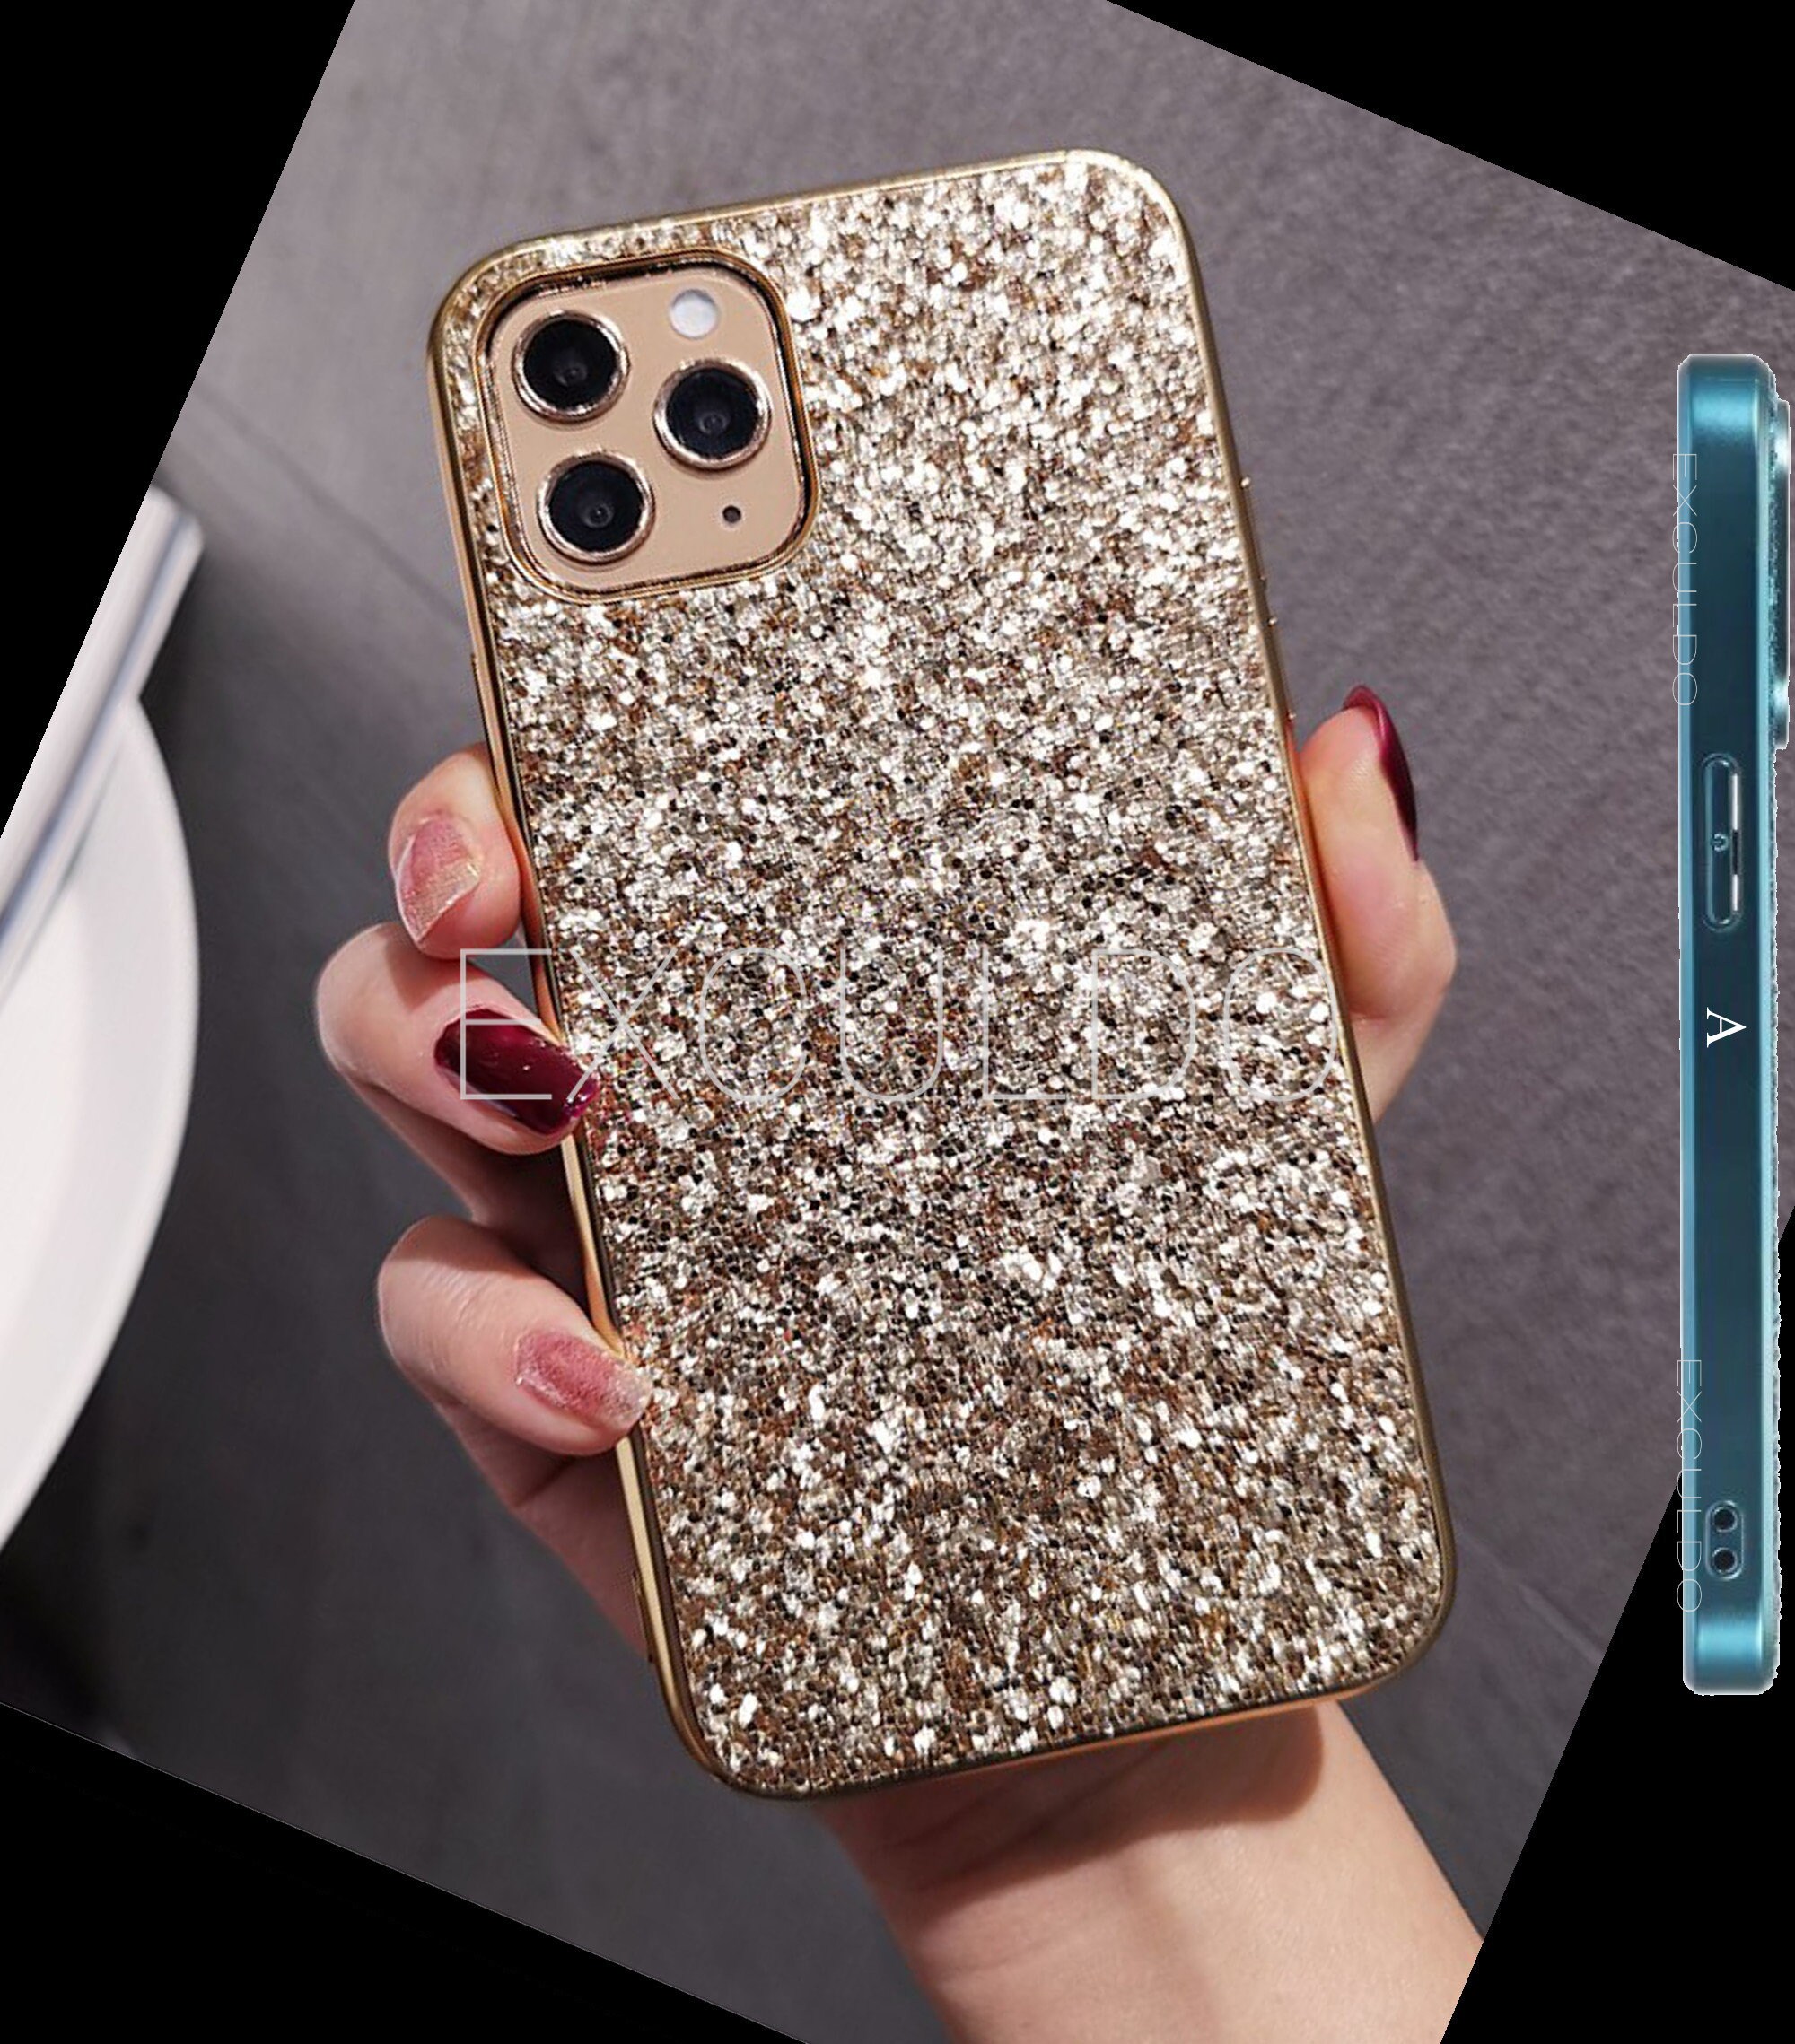  Muntonski Compatible with Apple iPhone 11 Case Square Edge  Trunk wome Luxury Girly 11Cases Bling Glitter Sparkly Cute Bee Fashion  Protective Bumper 6.1 inch 2019 (Gold) : Cell Phones & Accessories